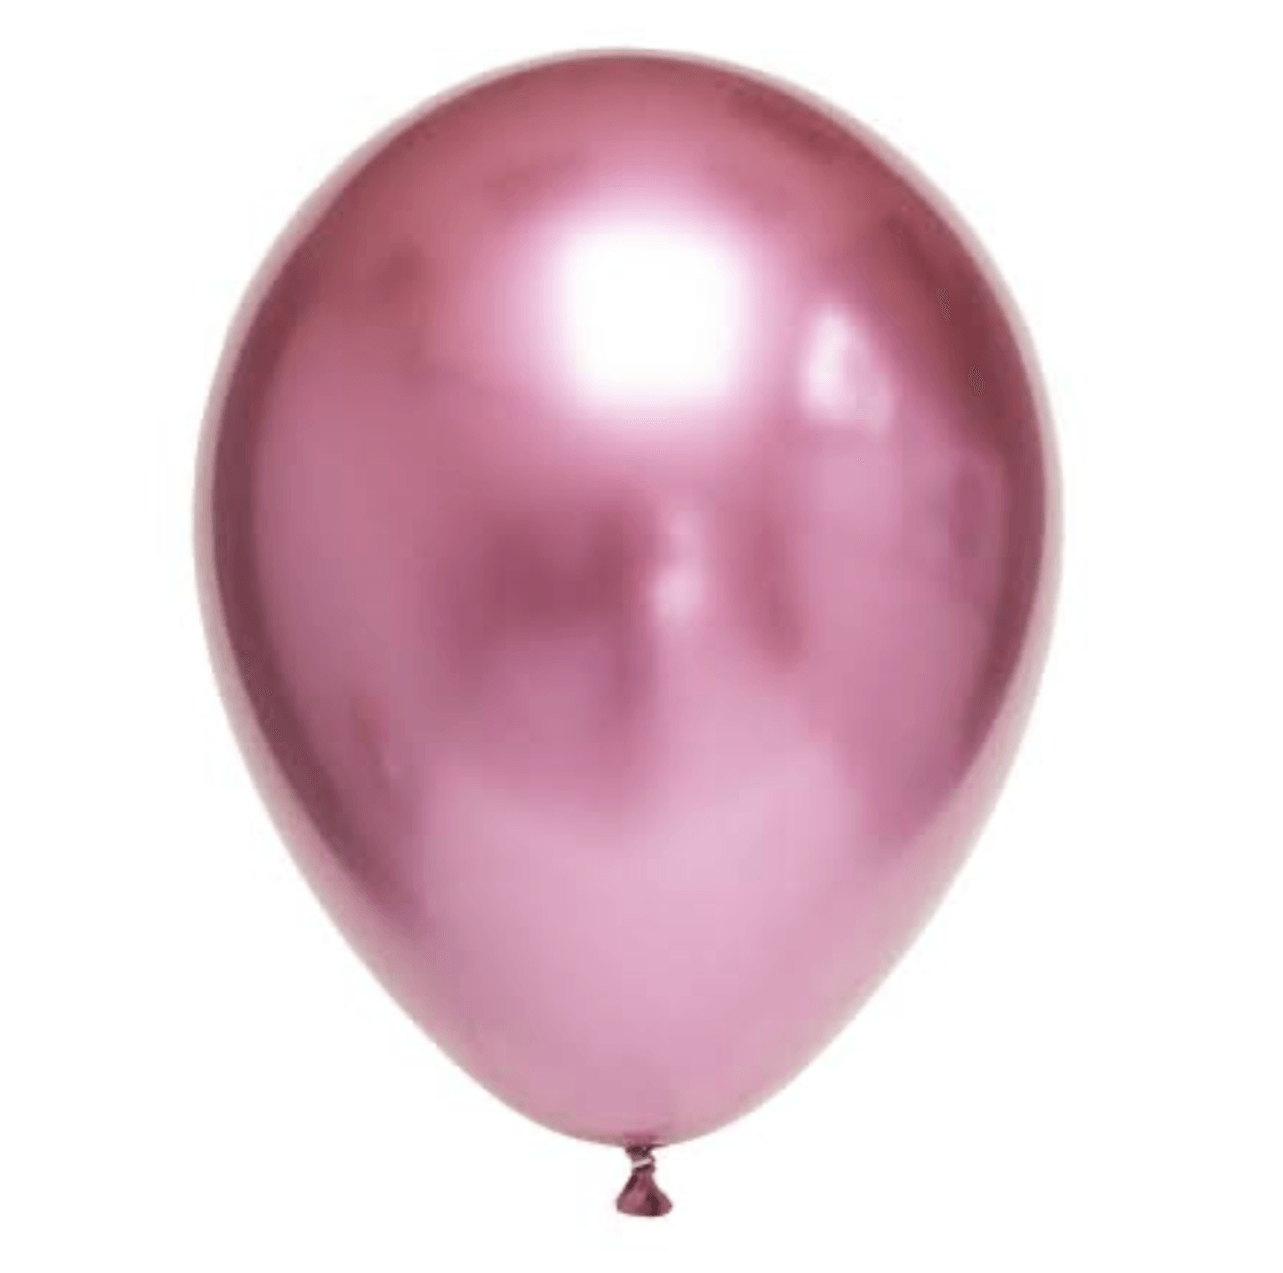 Helium Metalic Balloons (Pack Of 20) - Expat Life Style